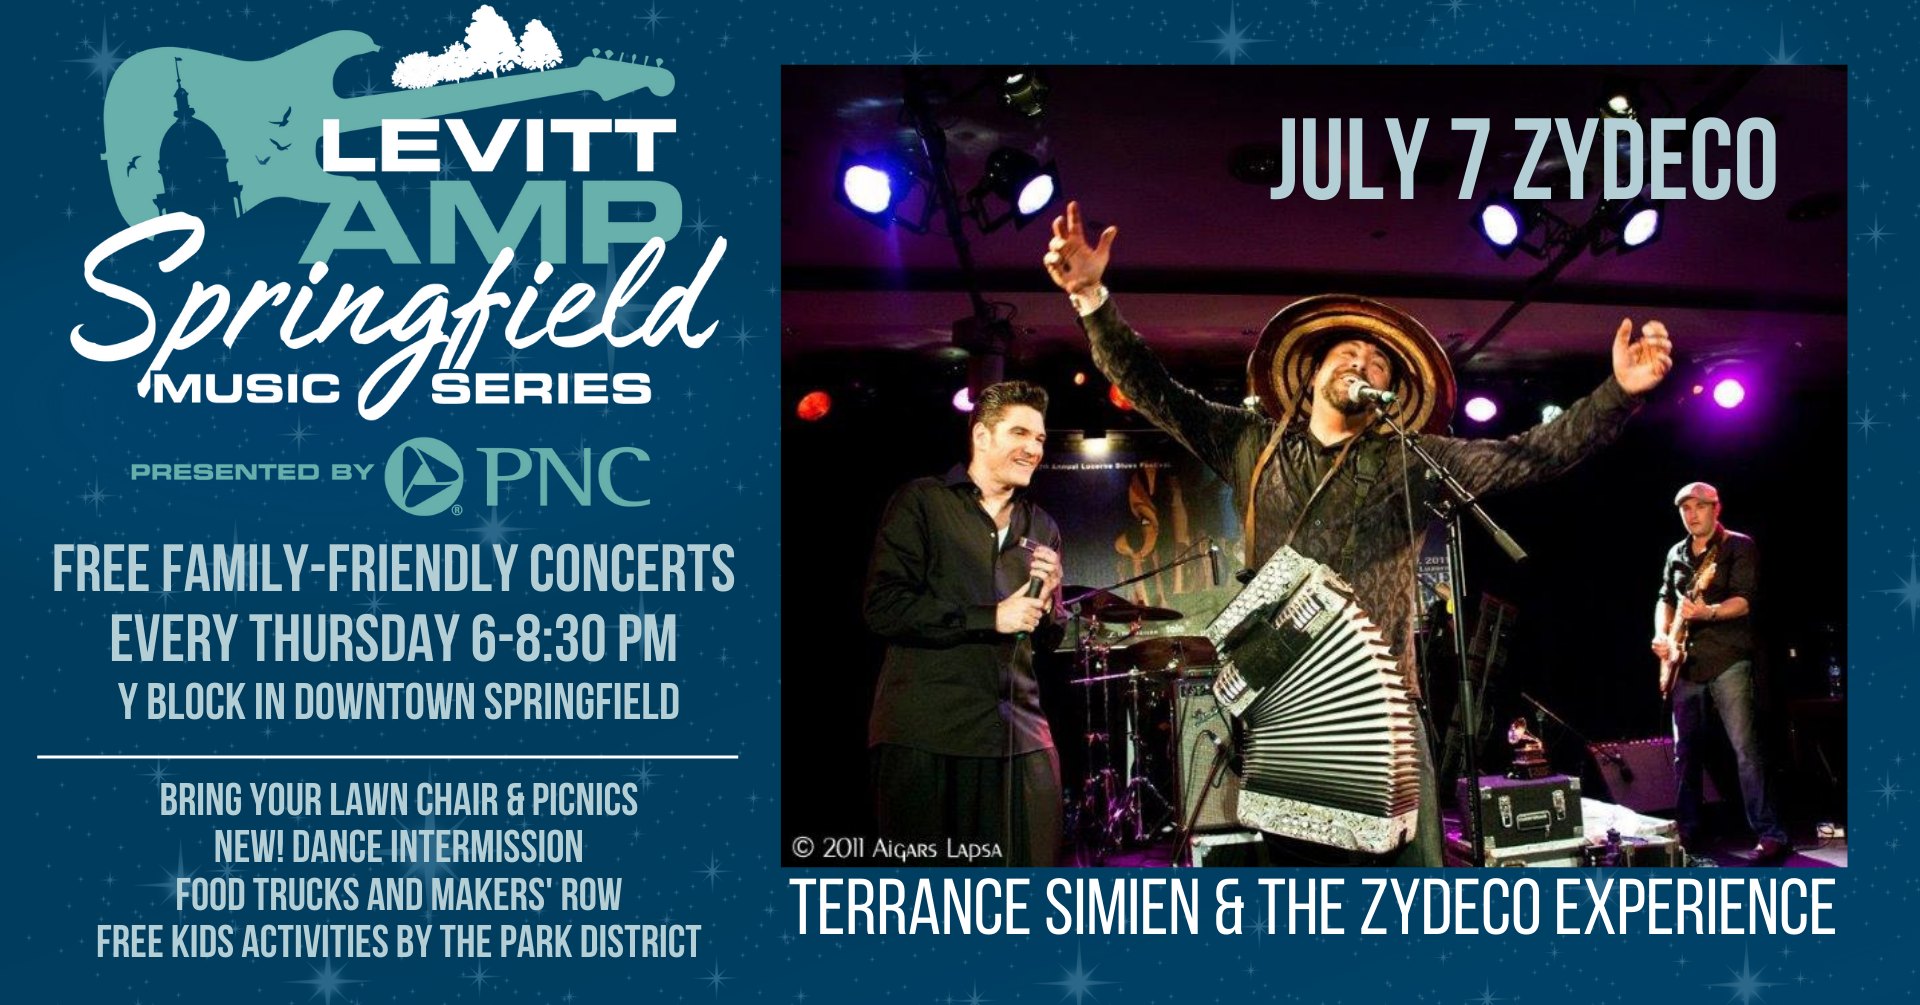 July 7 Zydeco Terrance Simien & the Zydeco Experience